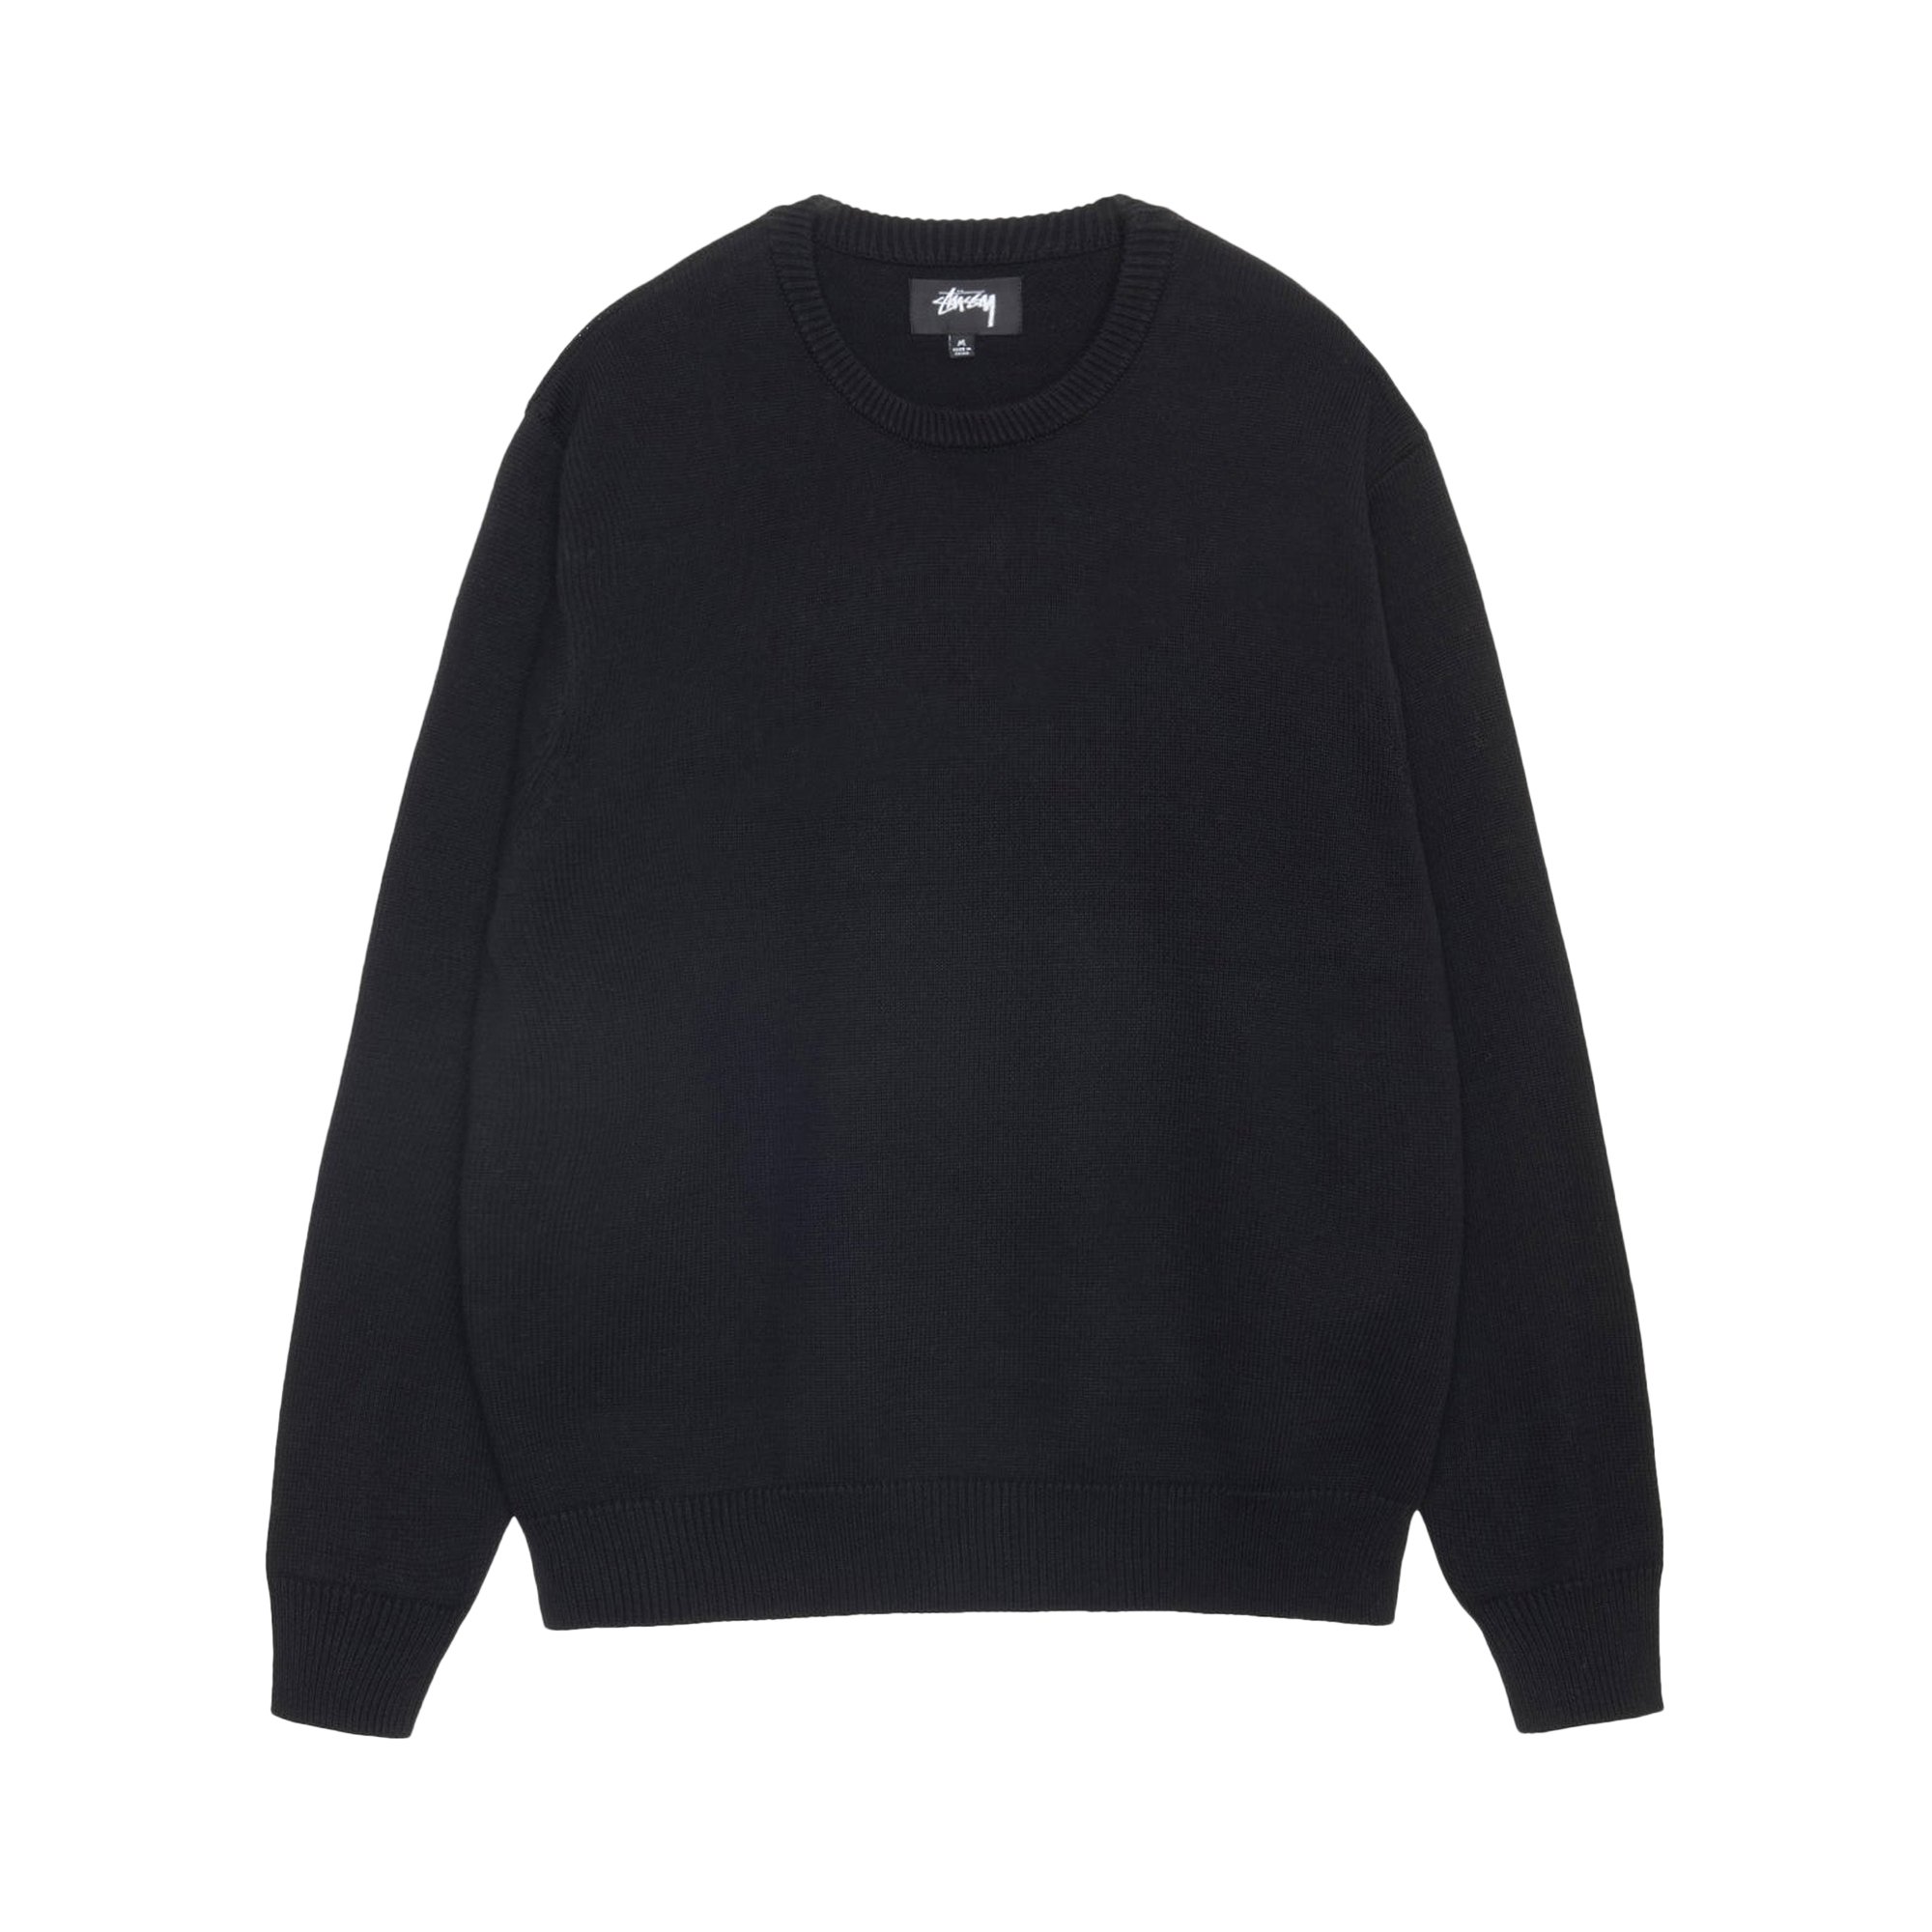 Buy Stussy Authentic Workgear Sweater 'Black' - 117212 BLAC | GOAT